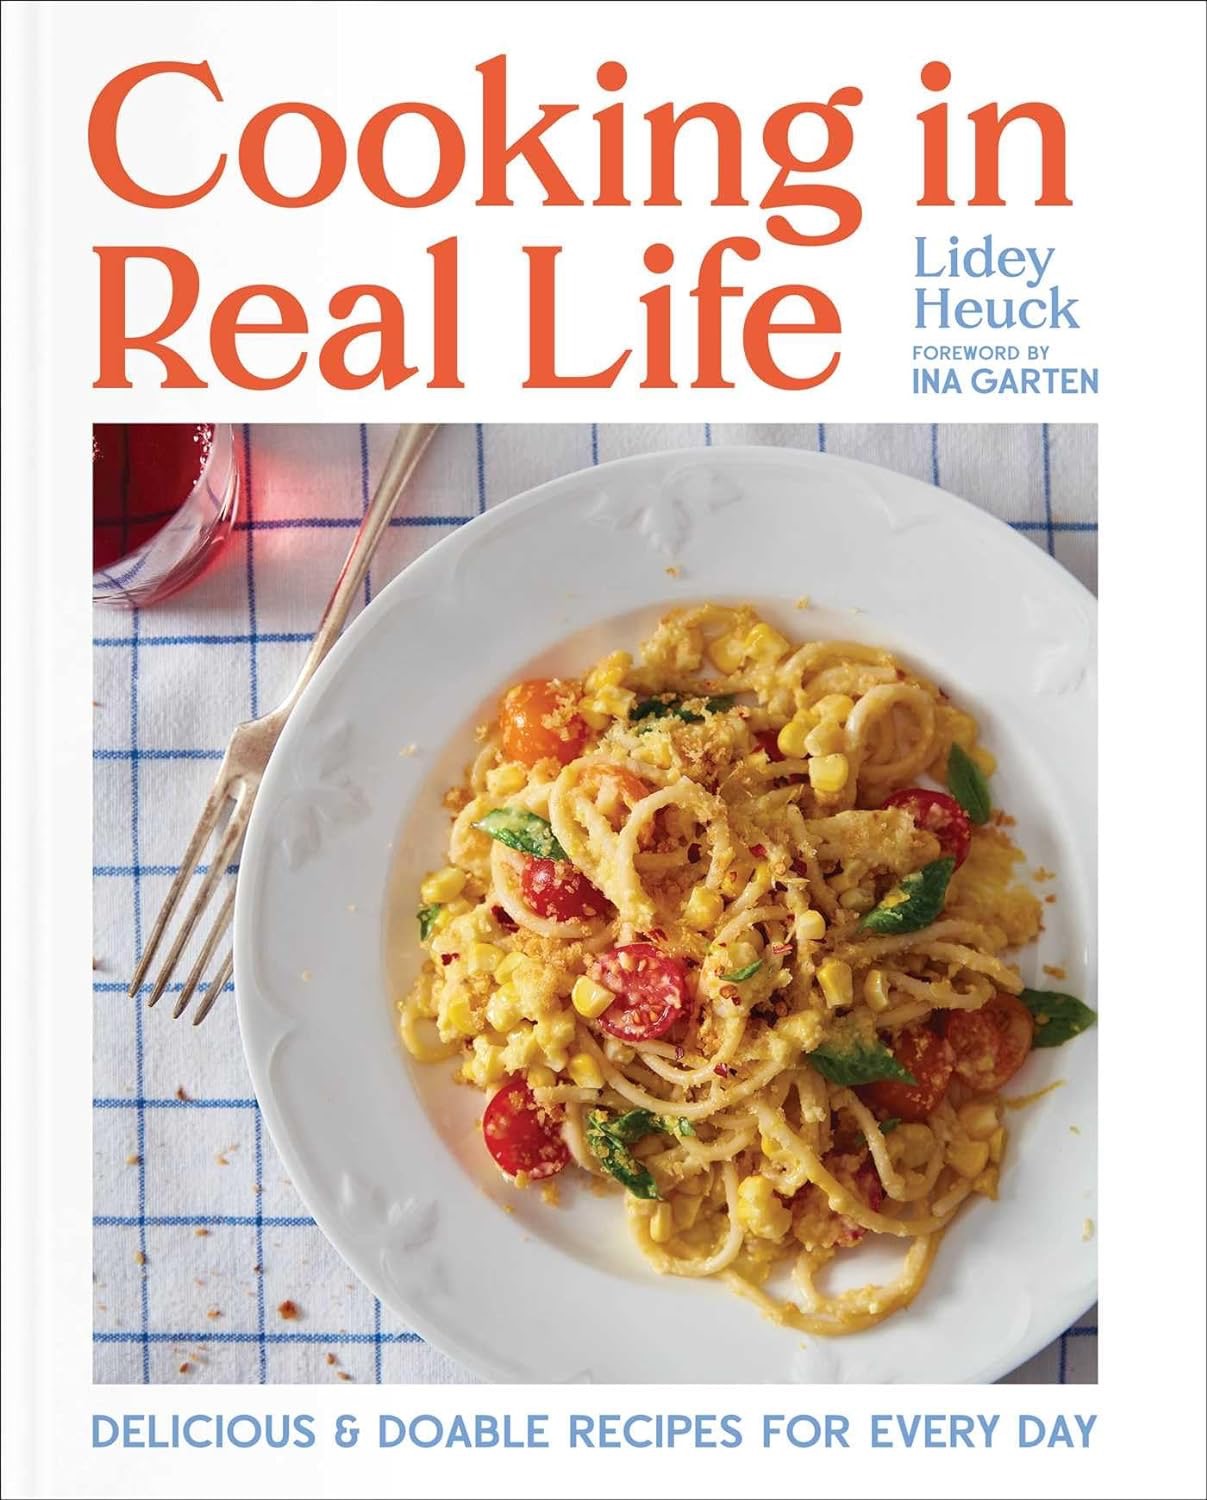 Cooking in Real Life book cover.